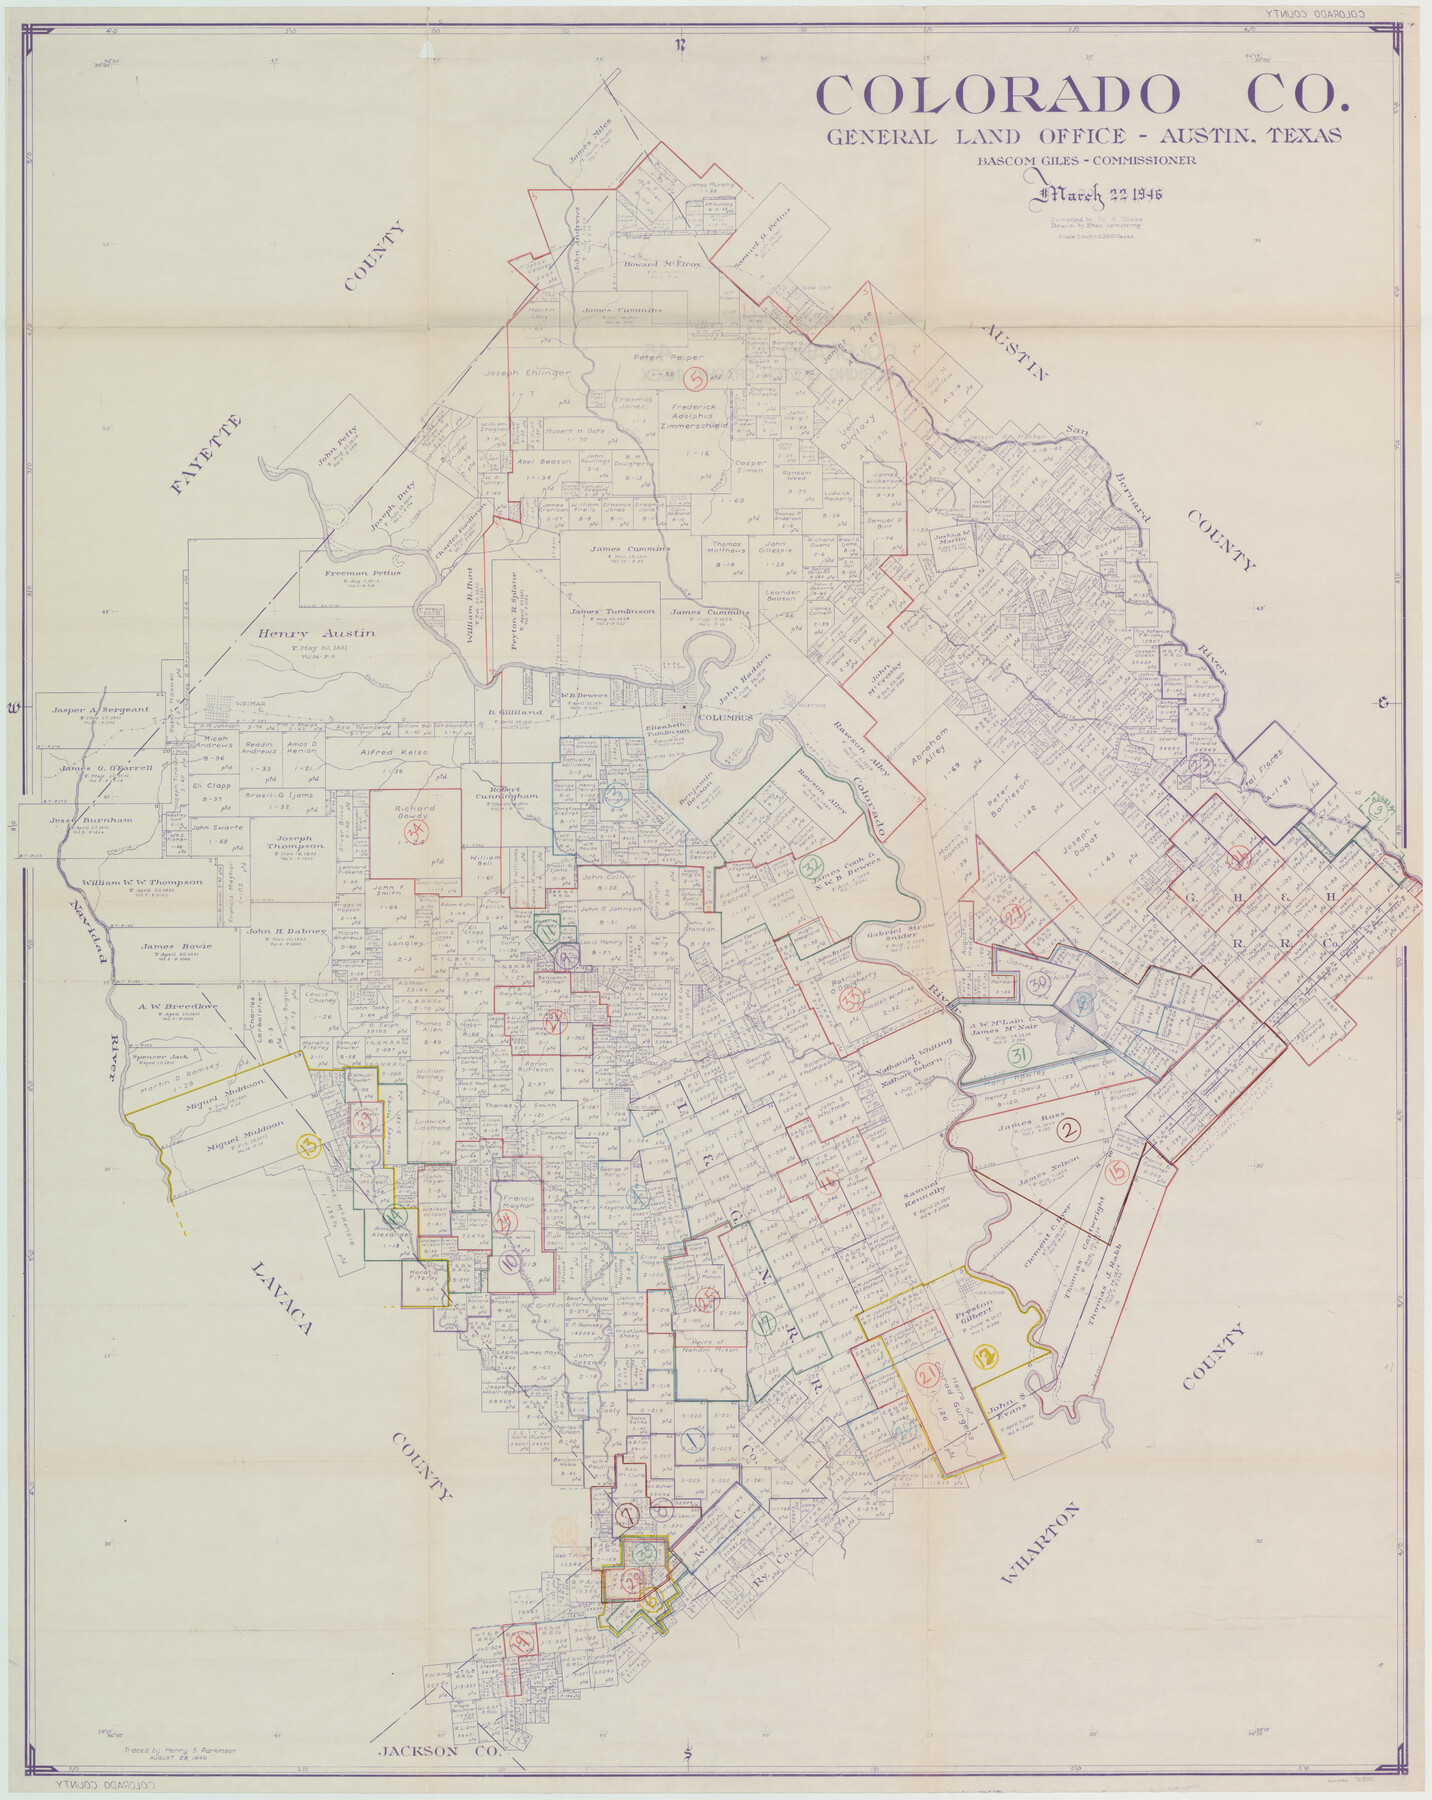 76500, Colorado County Working Sketch Graphic Index, General Map Collection